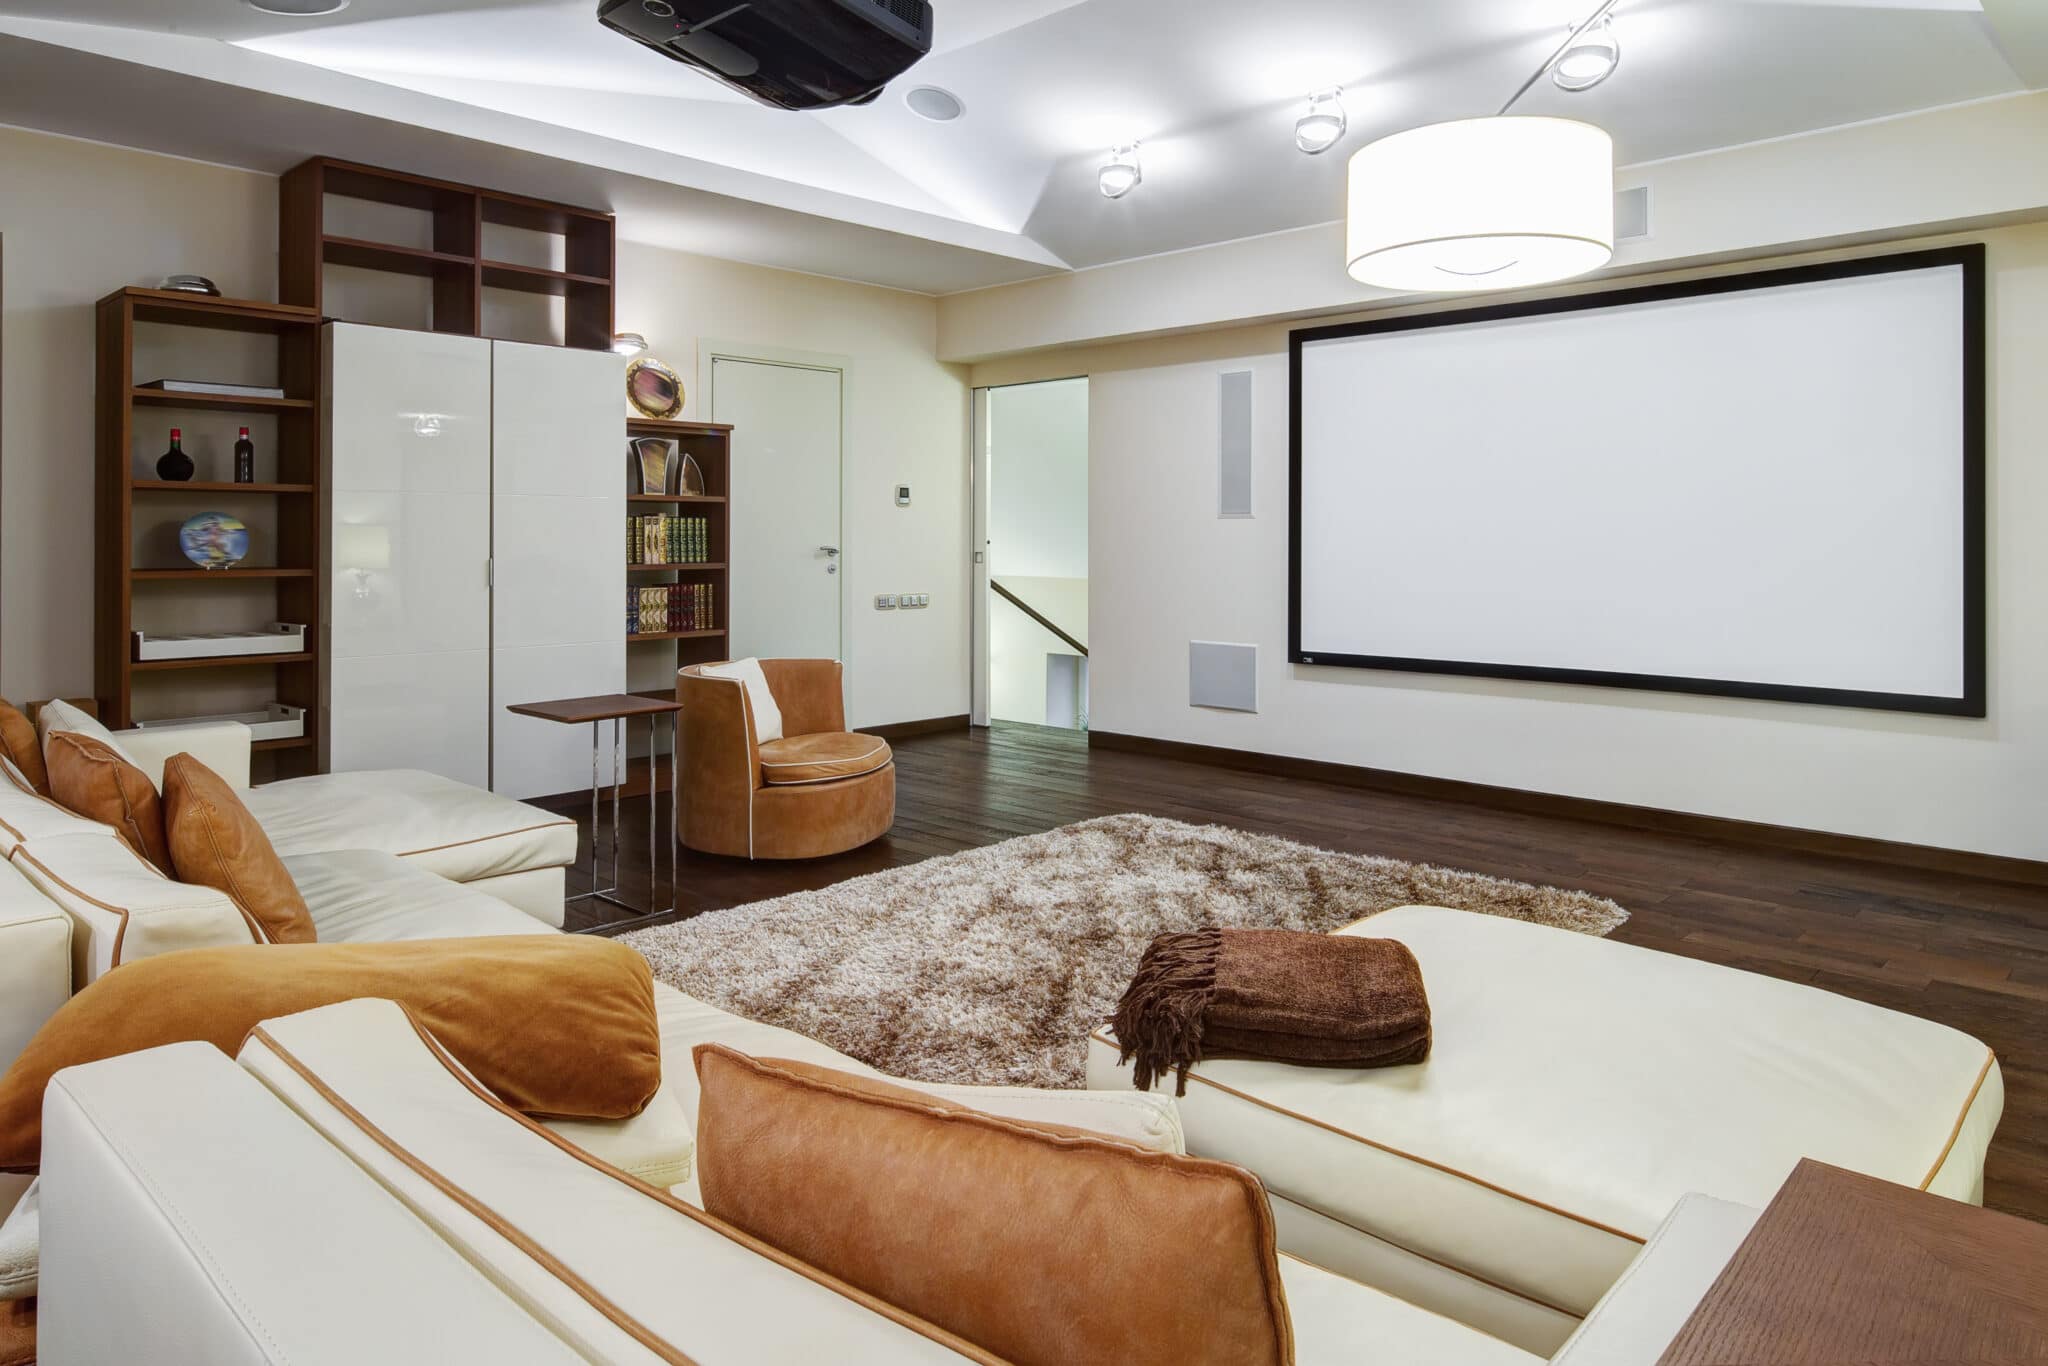 Home Theater - Home theater systems with projector, speakers, receiver,  mounting brackets, cables and more.